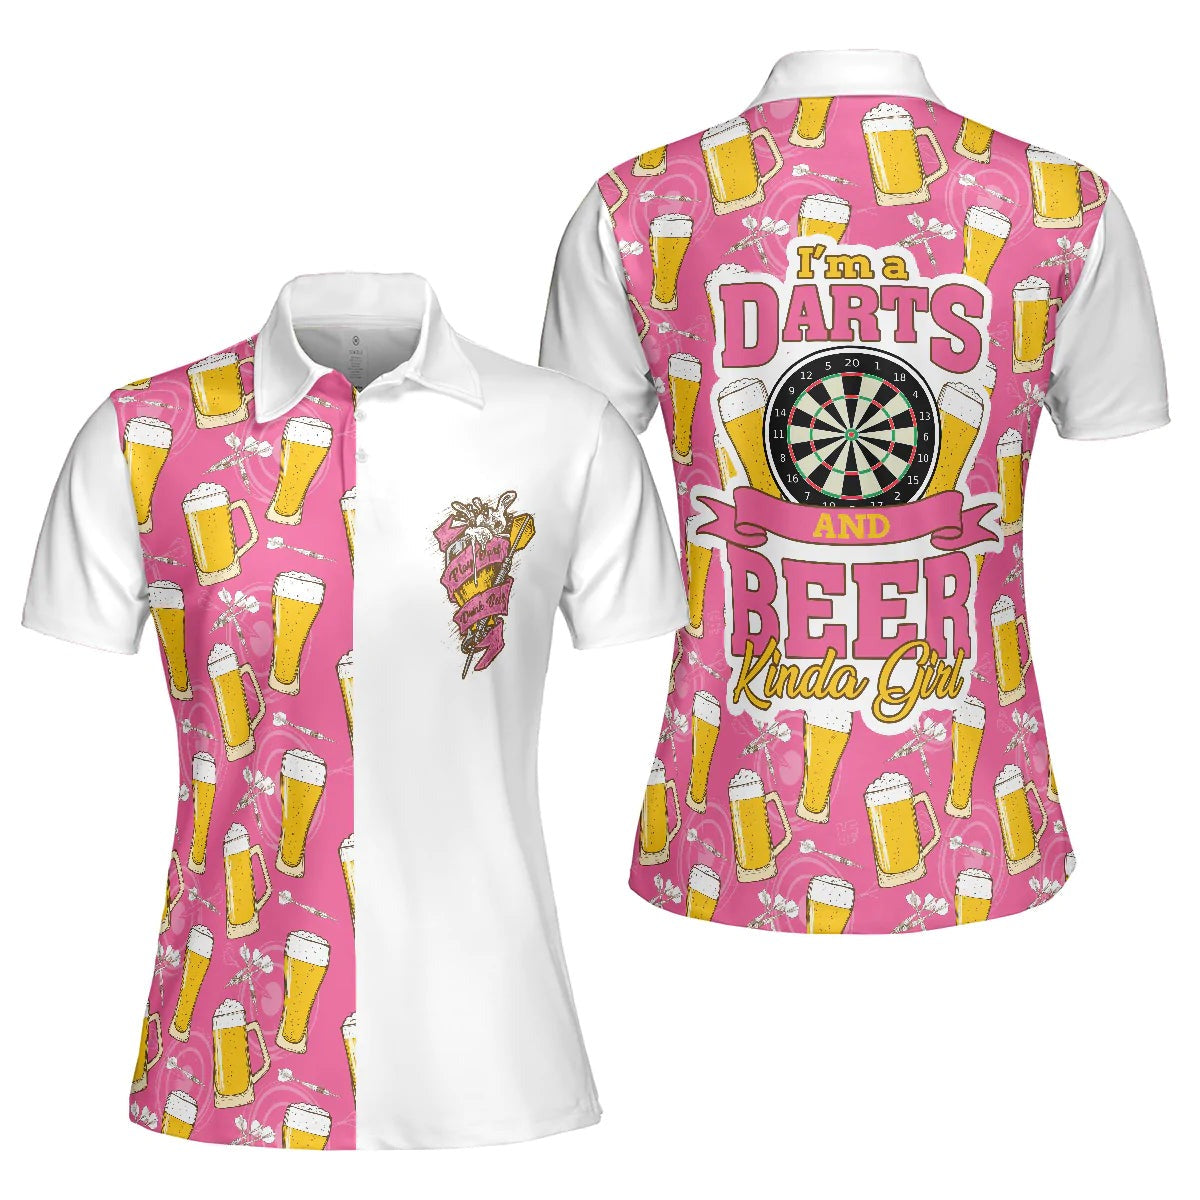 Darts And Beer Women Polo Shirt, I'm A Darts And Beer Kinda Girl, Funny Pink Women Polo Shirts, Cool Darts Gift For Beer Lovers, Ladies, Darts Lovers